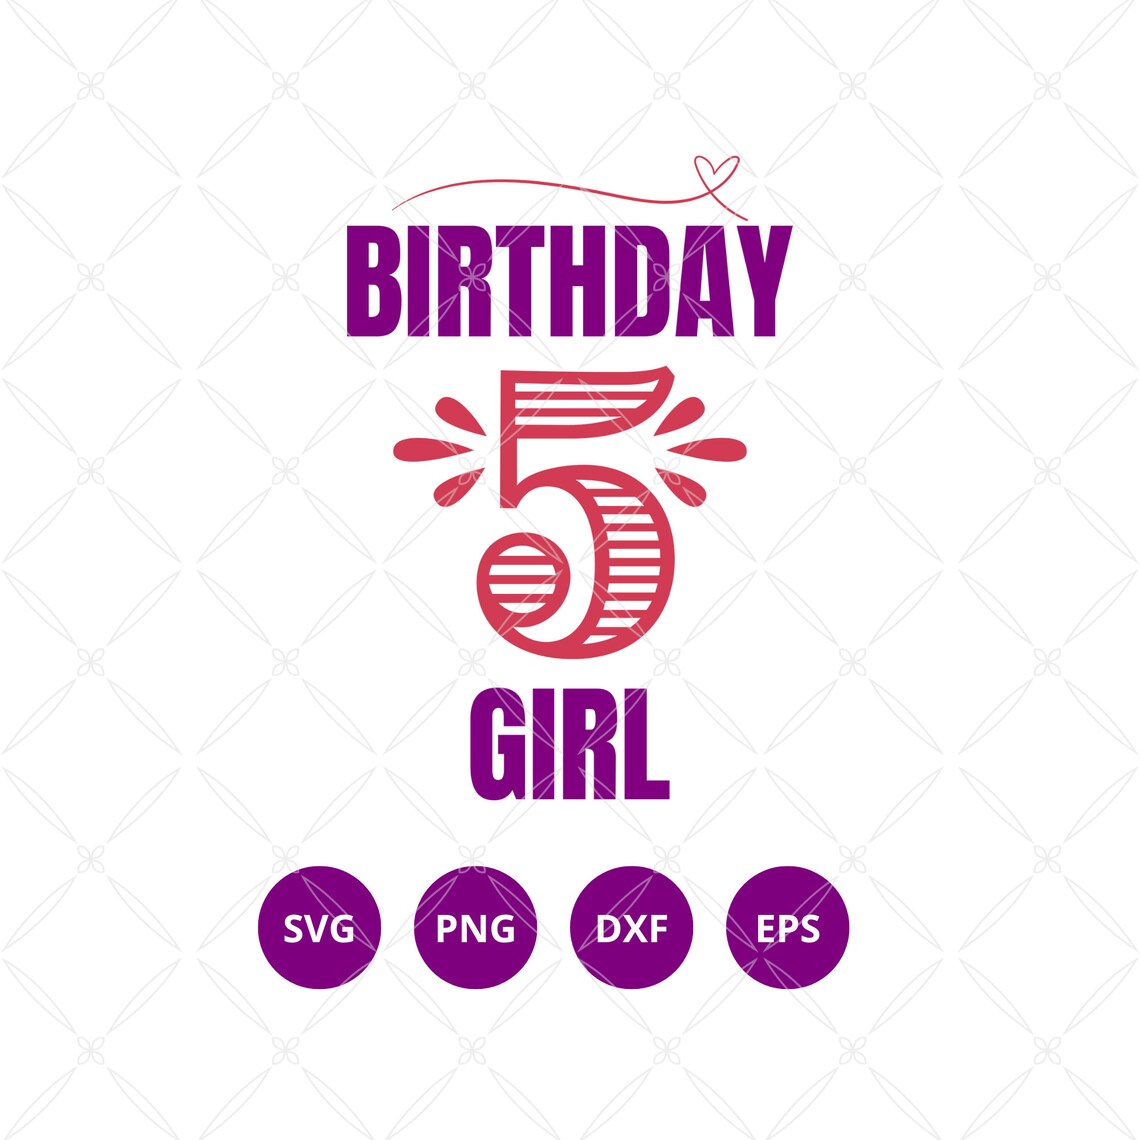 5th Birthday Girl Svg Png Dxf Eps 5 Year Old Birthday Girl Cut File - Etsy